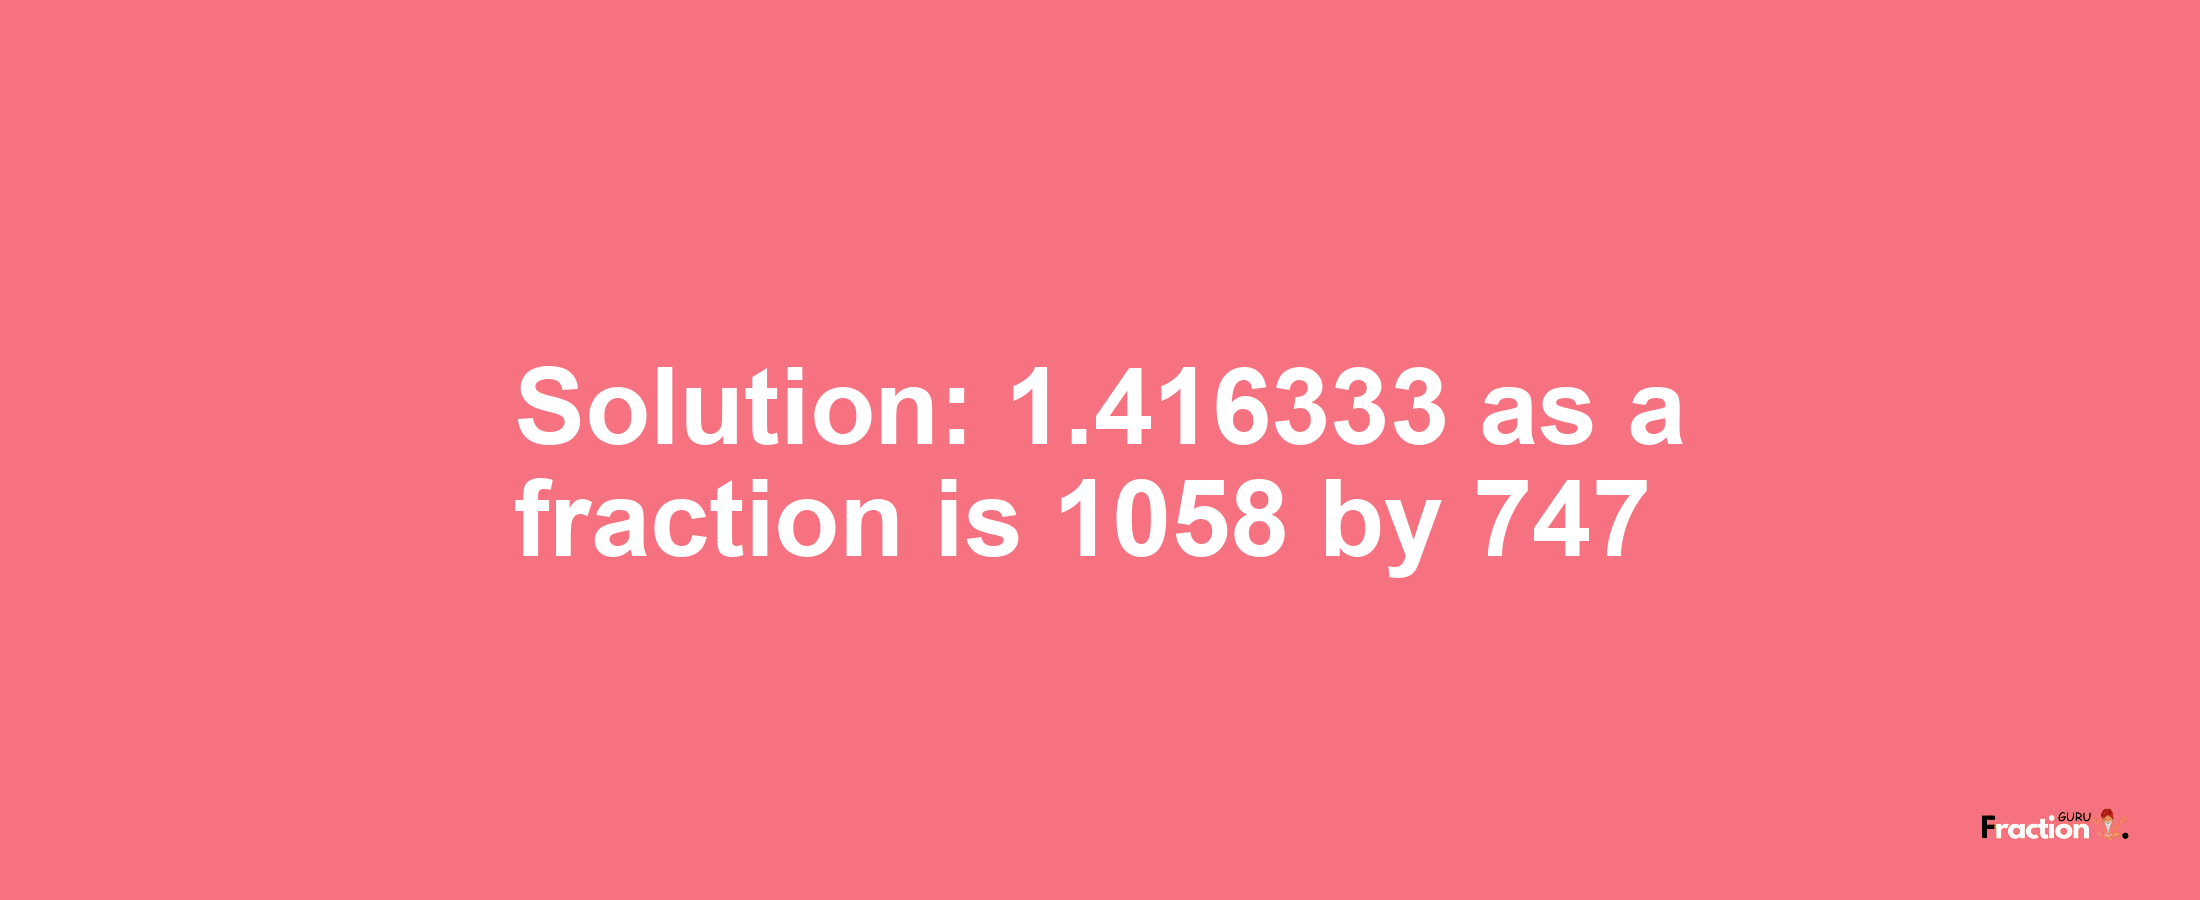 Solution:1.416333 as a fraction is 1058/747